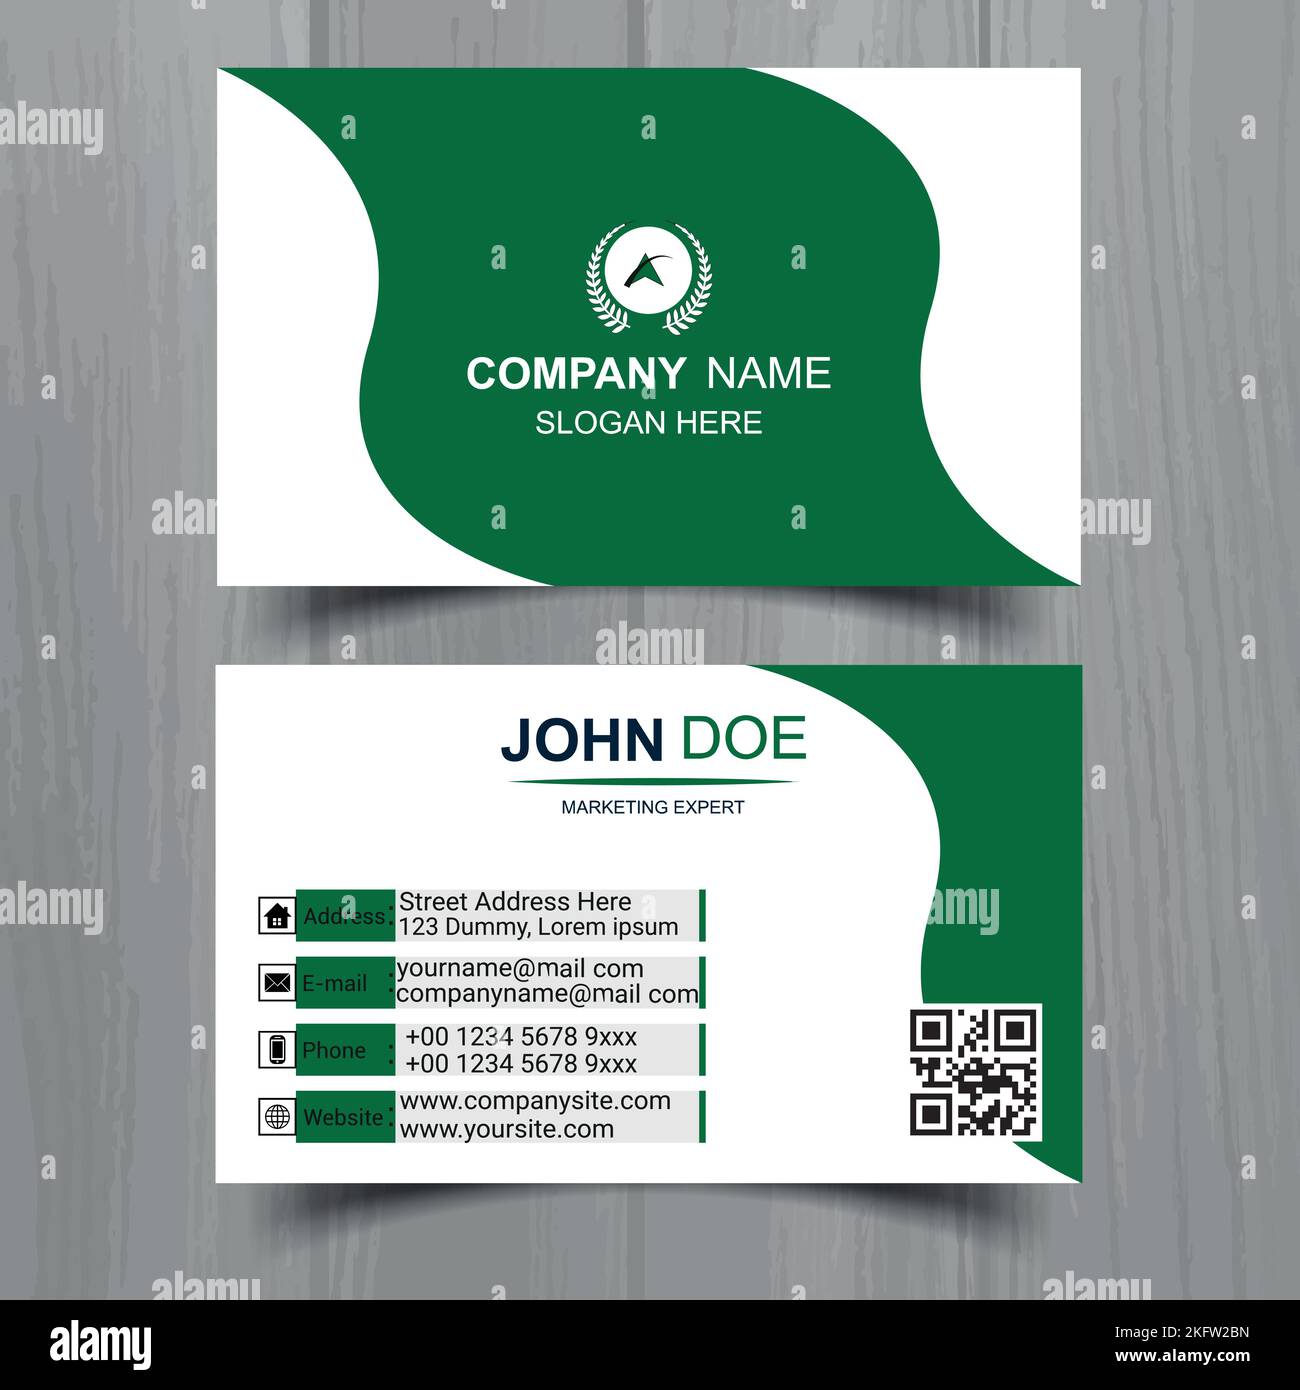 Professional business card design template Stock Vector